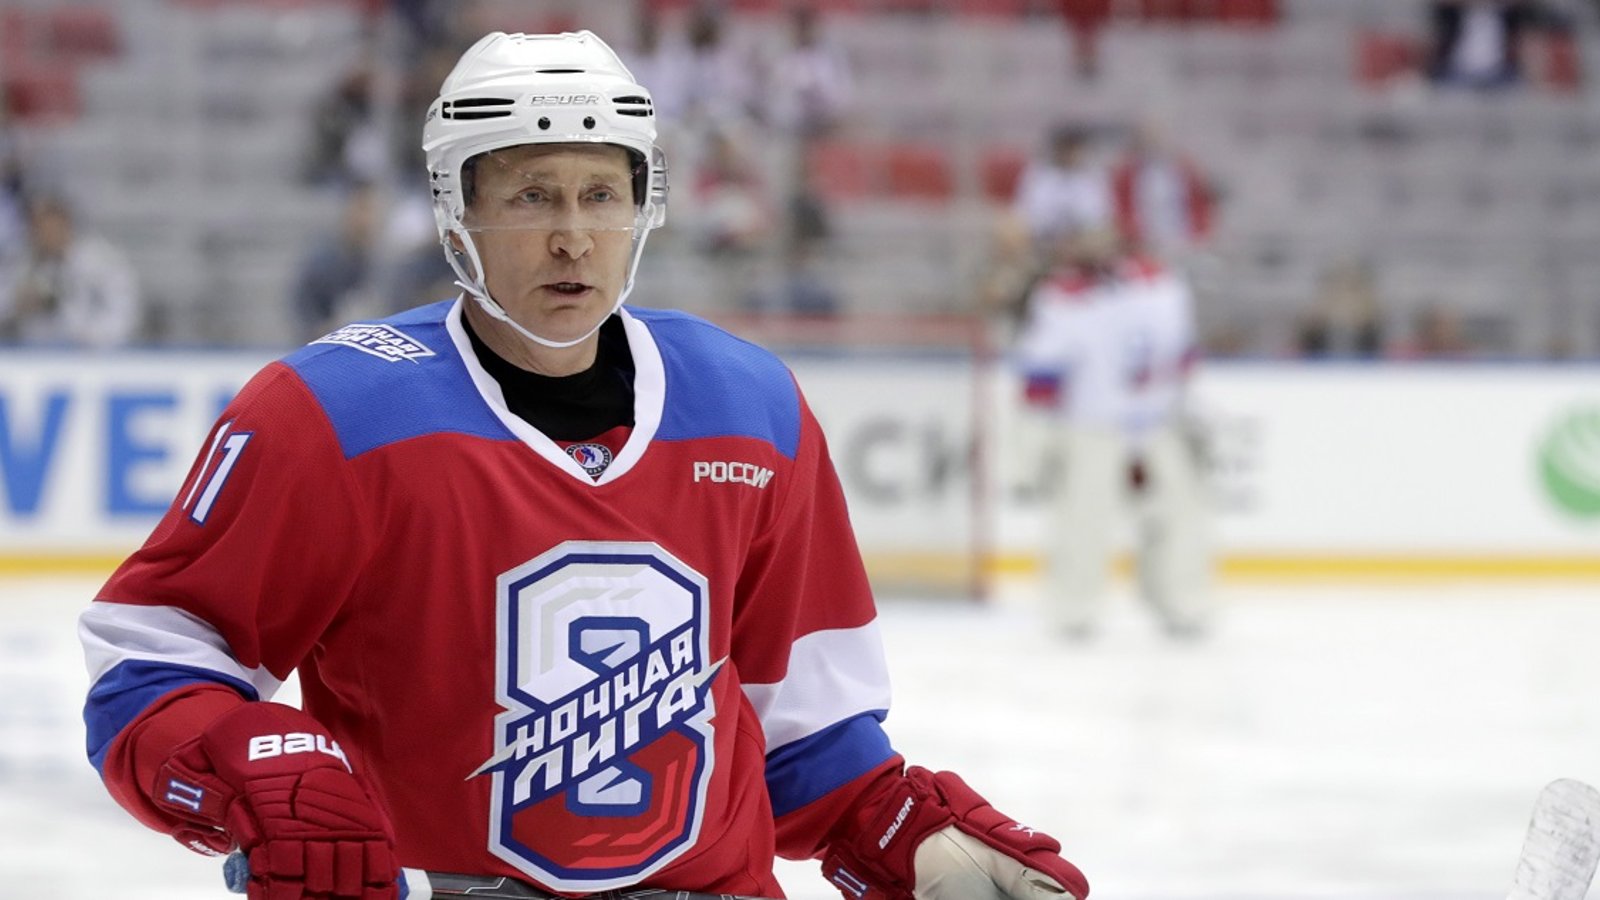 Vladimir Putin scores 10 goals in sham hockey game... and then falls flat on his face.